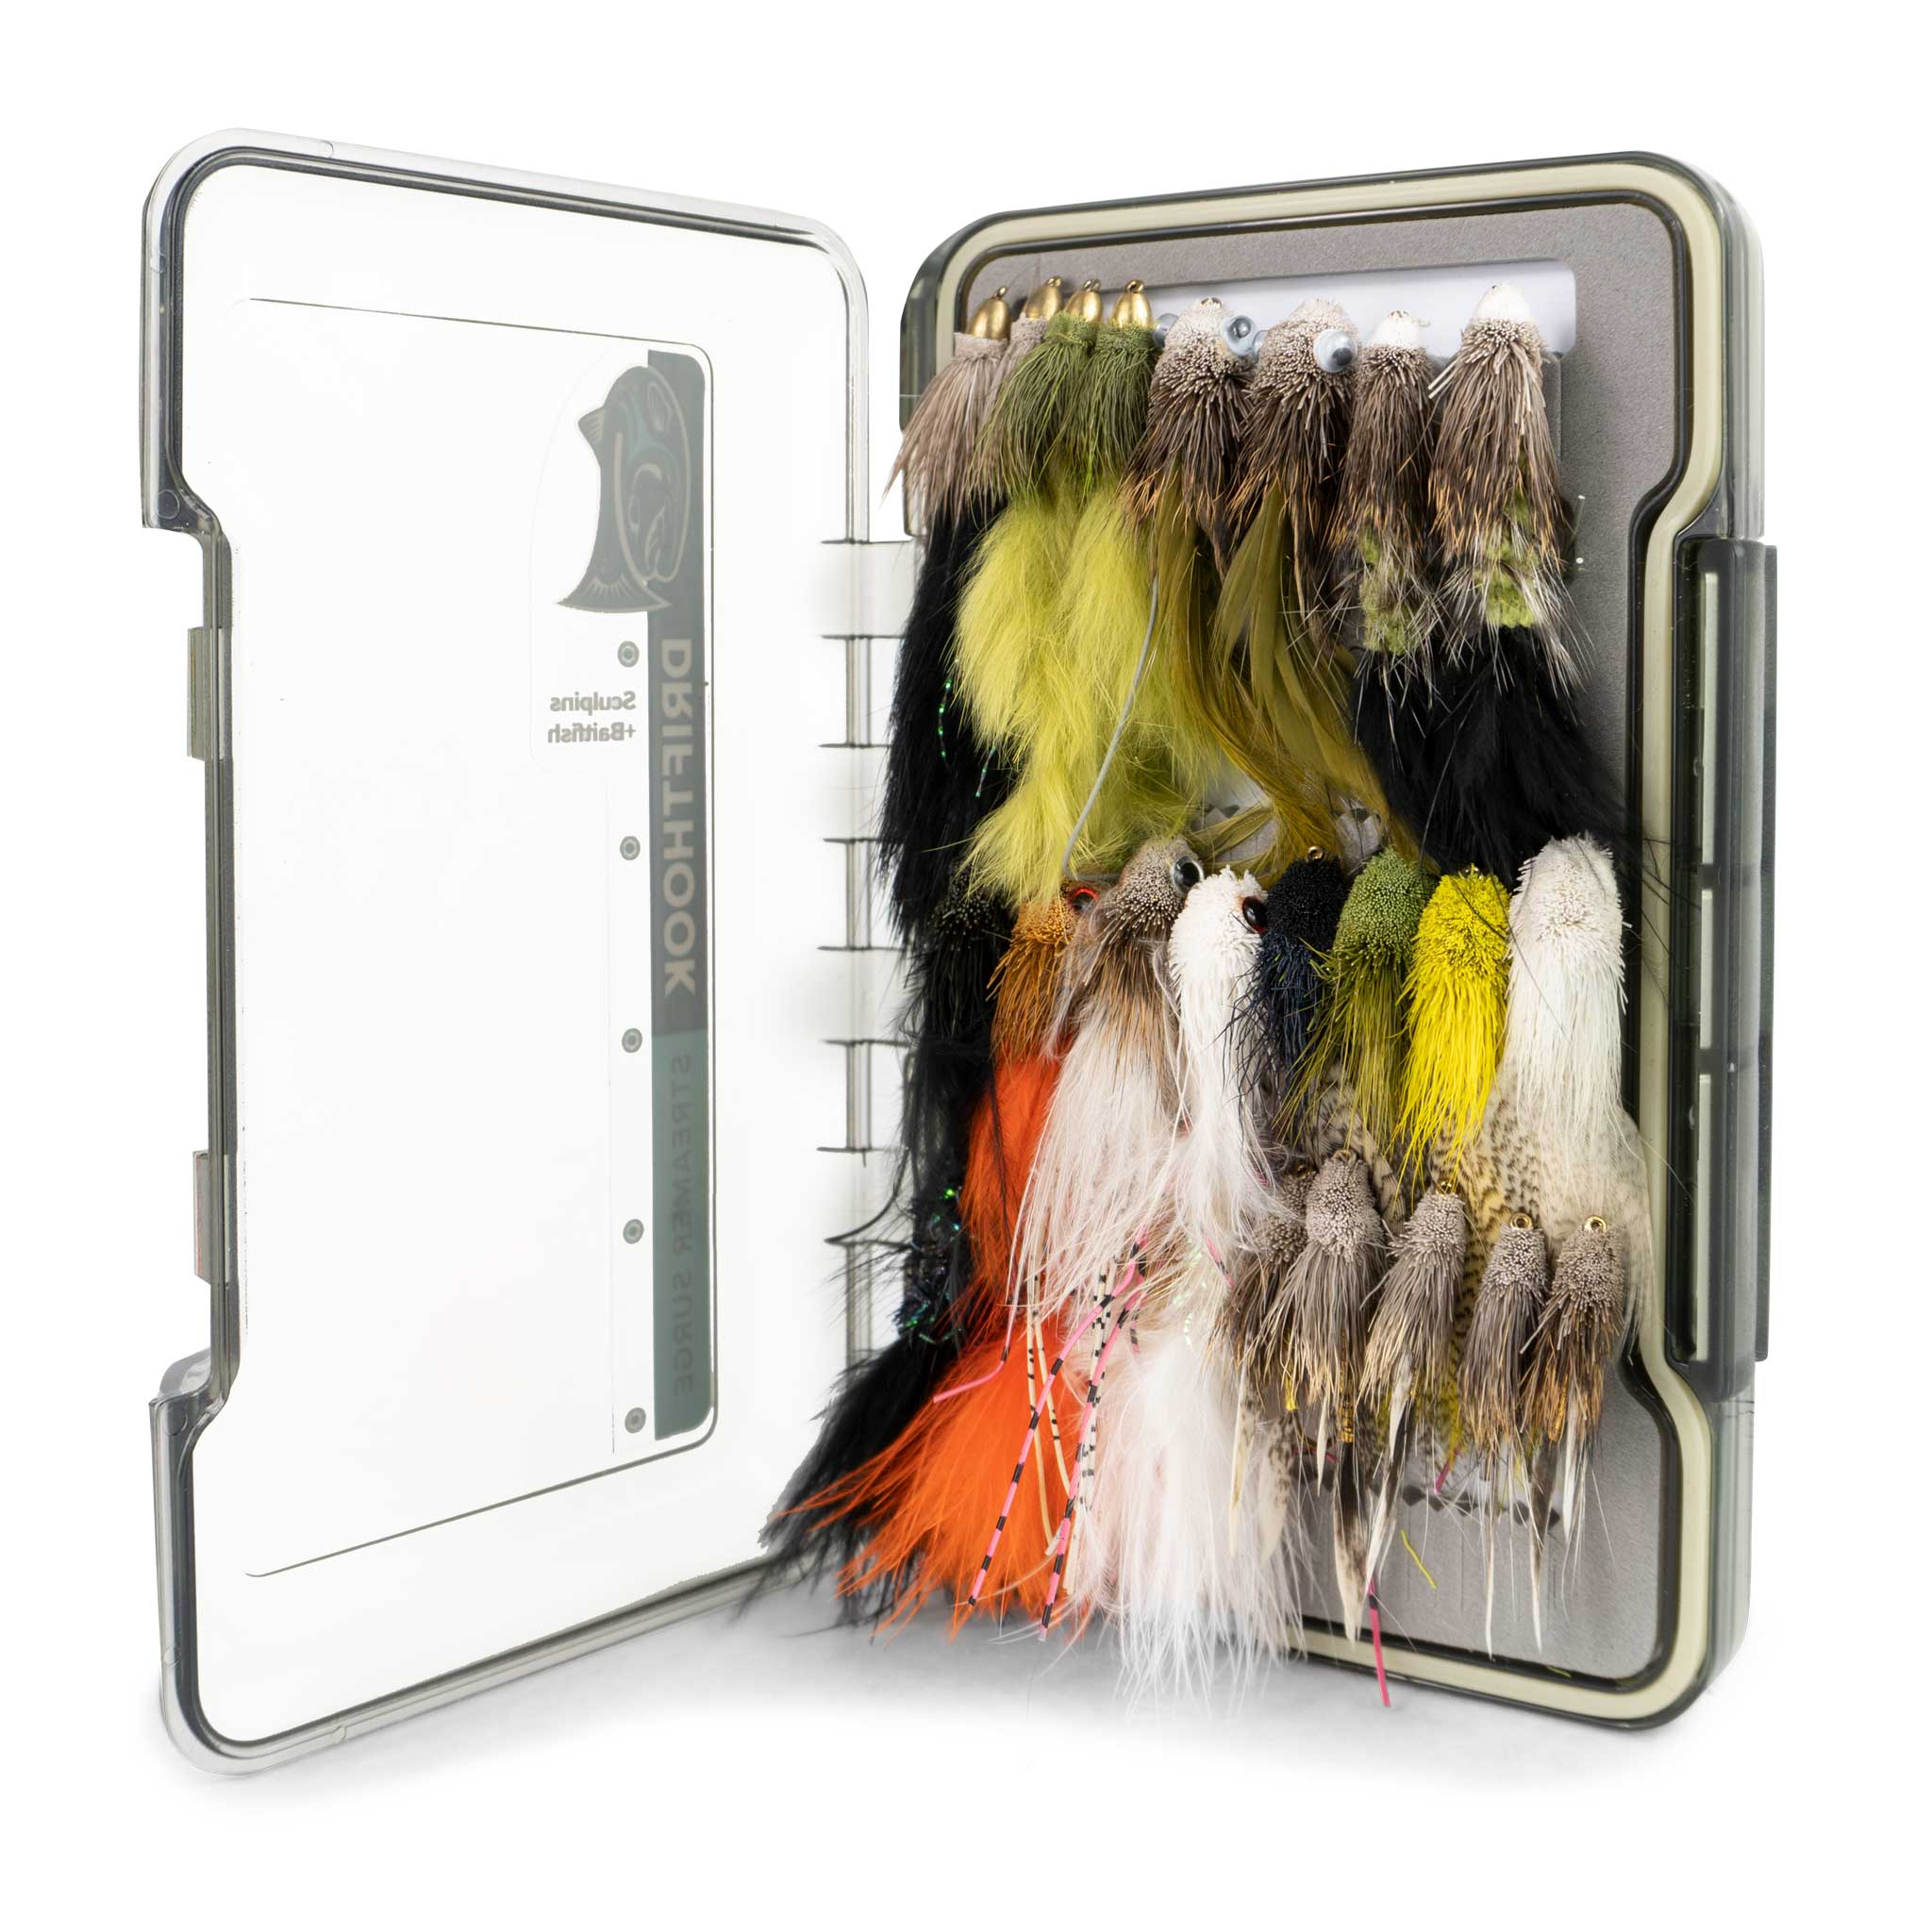 Fly Fishing Bait Kit Simulation Light Exquisite Fluffy Fluff Fly